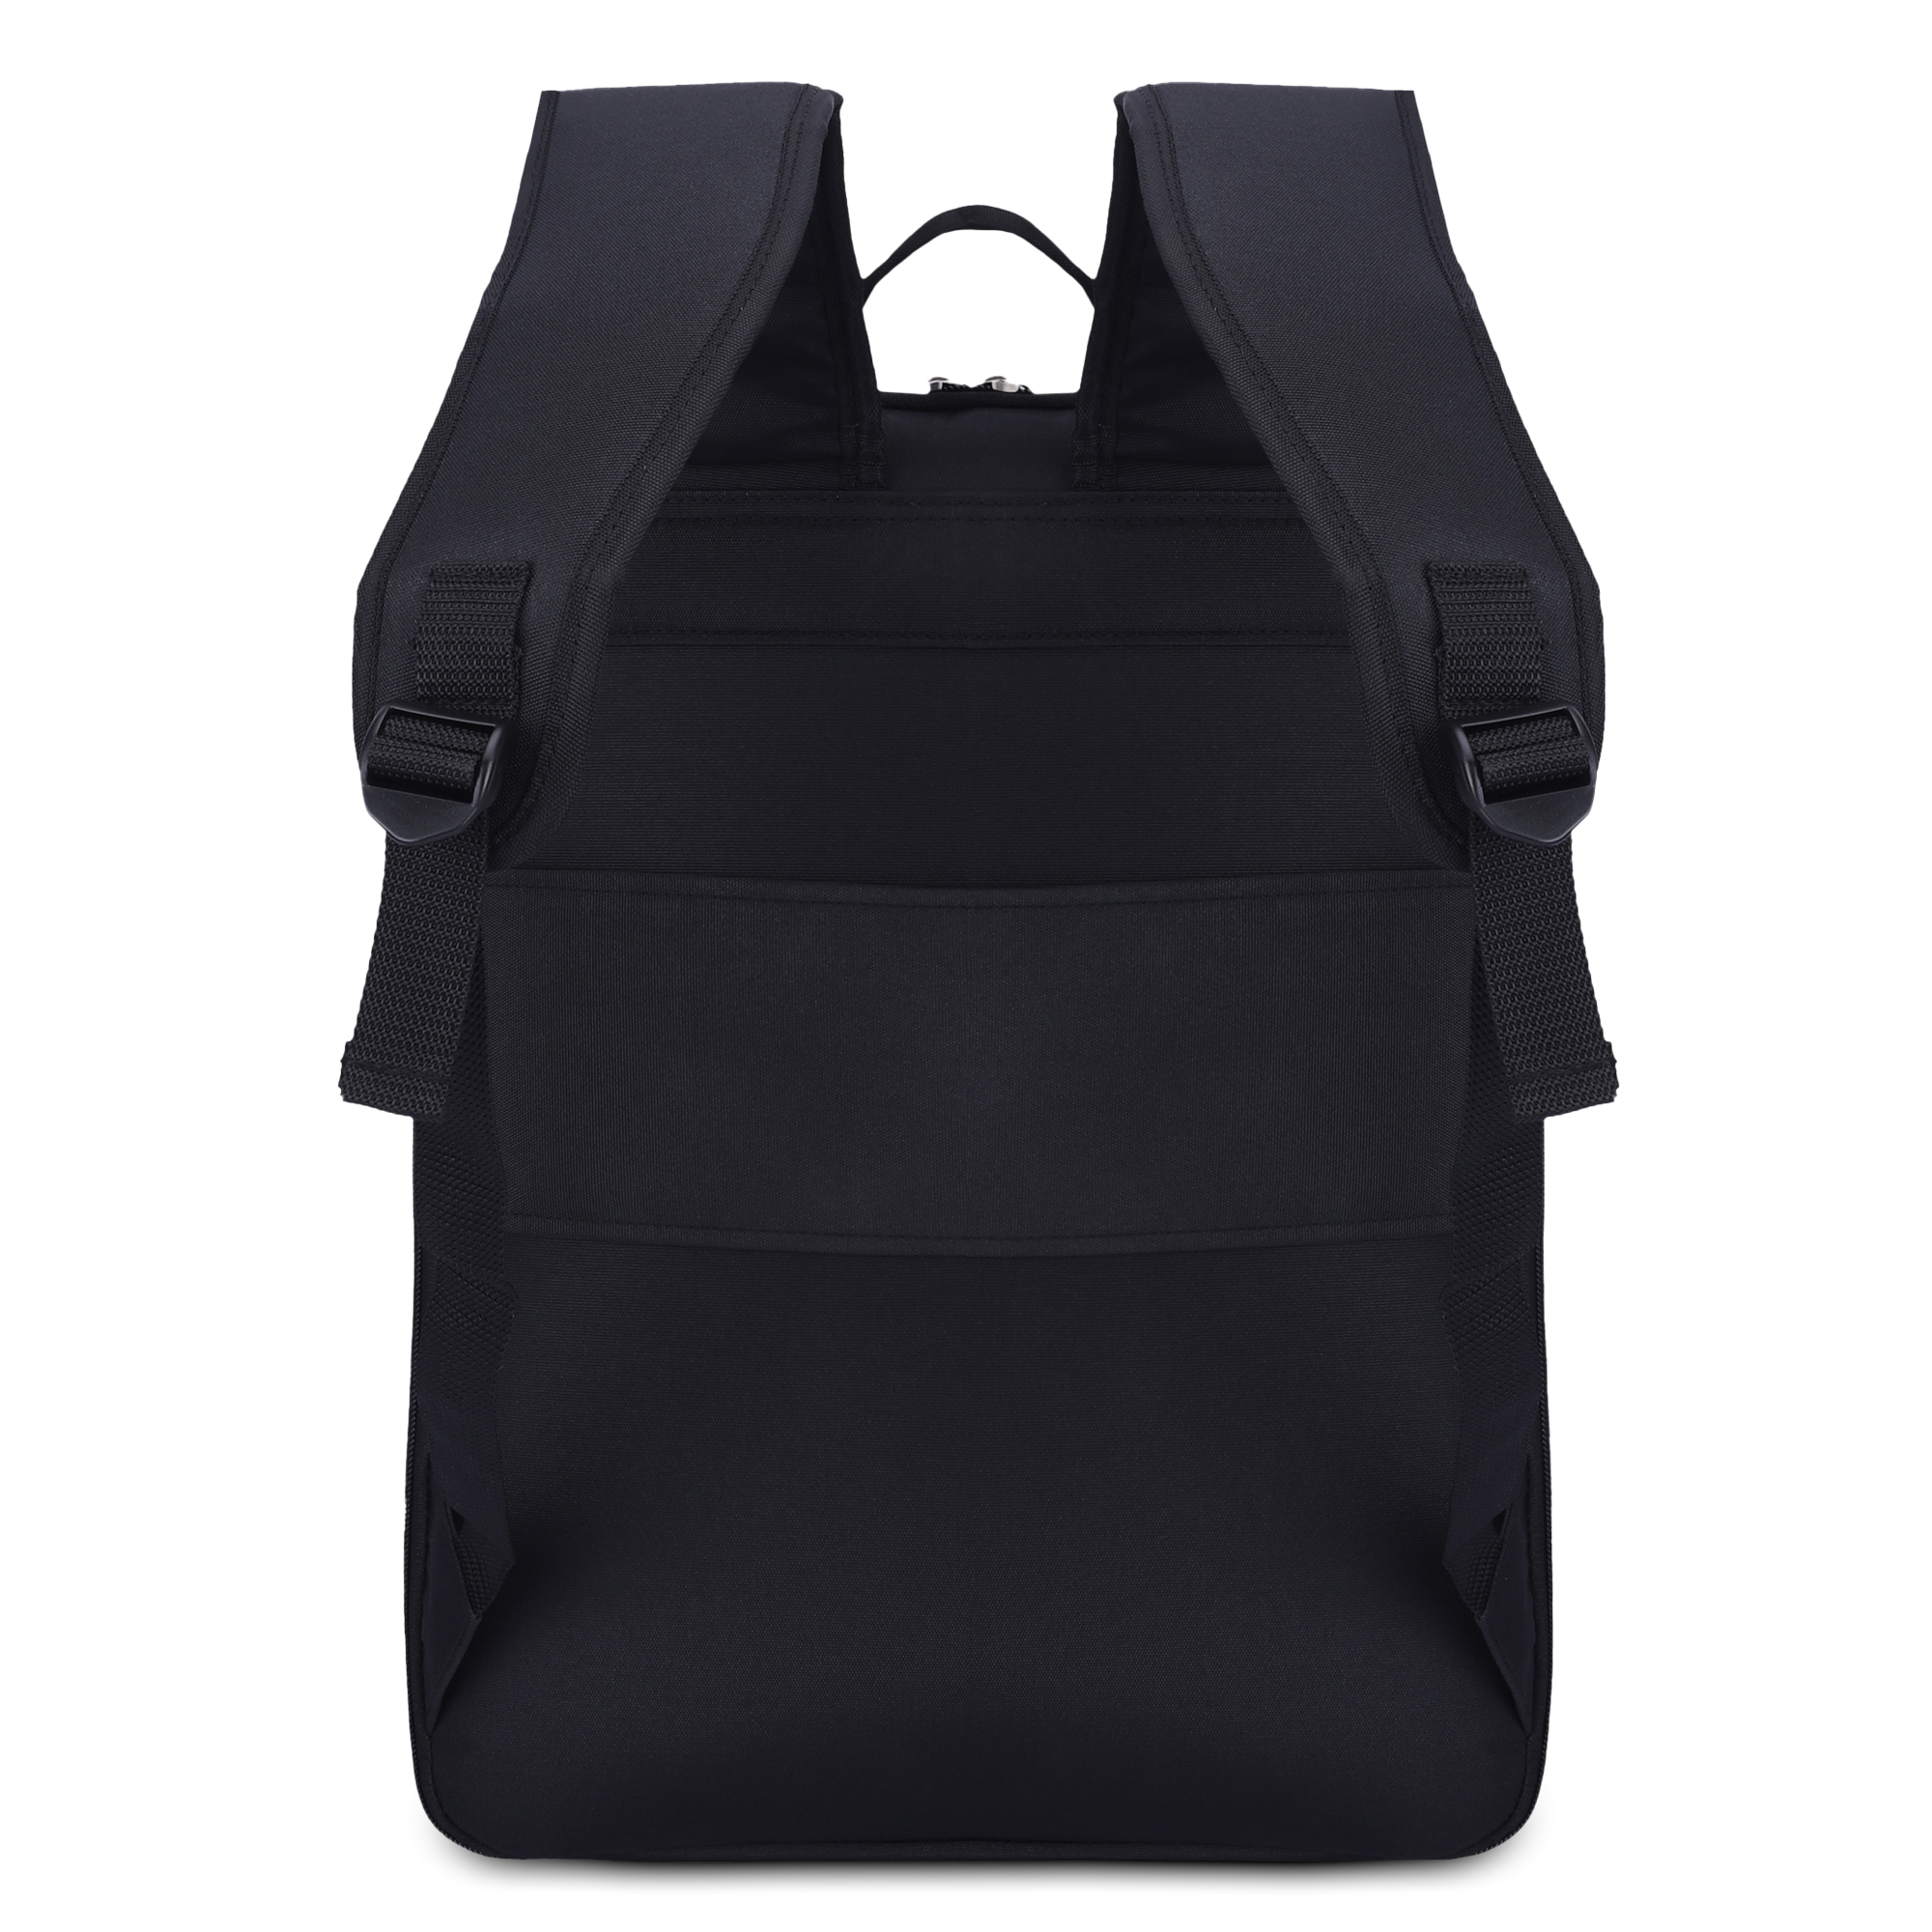 Black | Protecta Quest Anti-Theft Office Laptop Backpack - 5